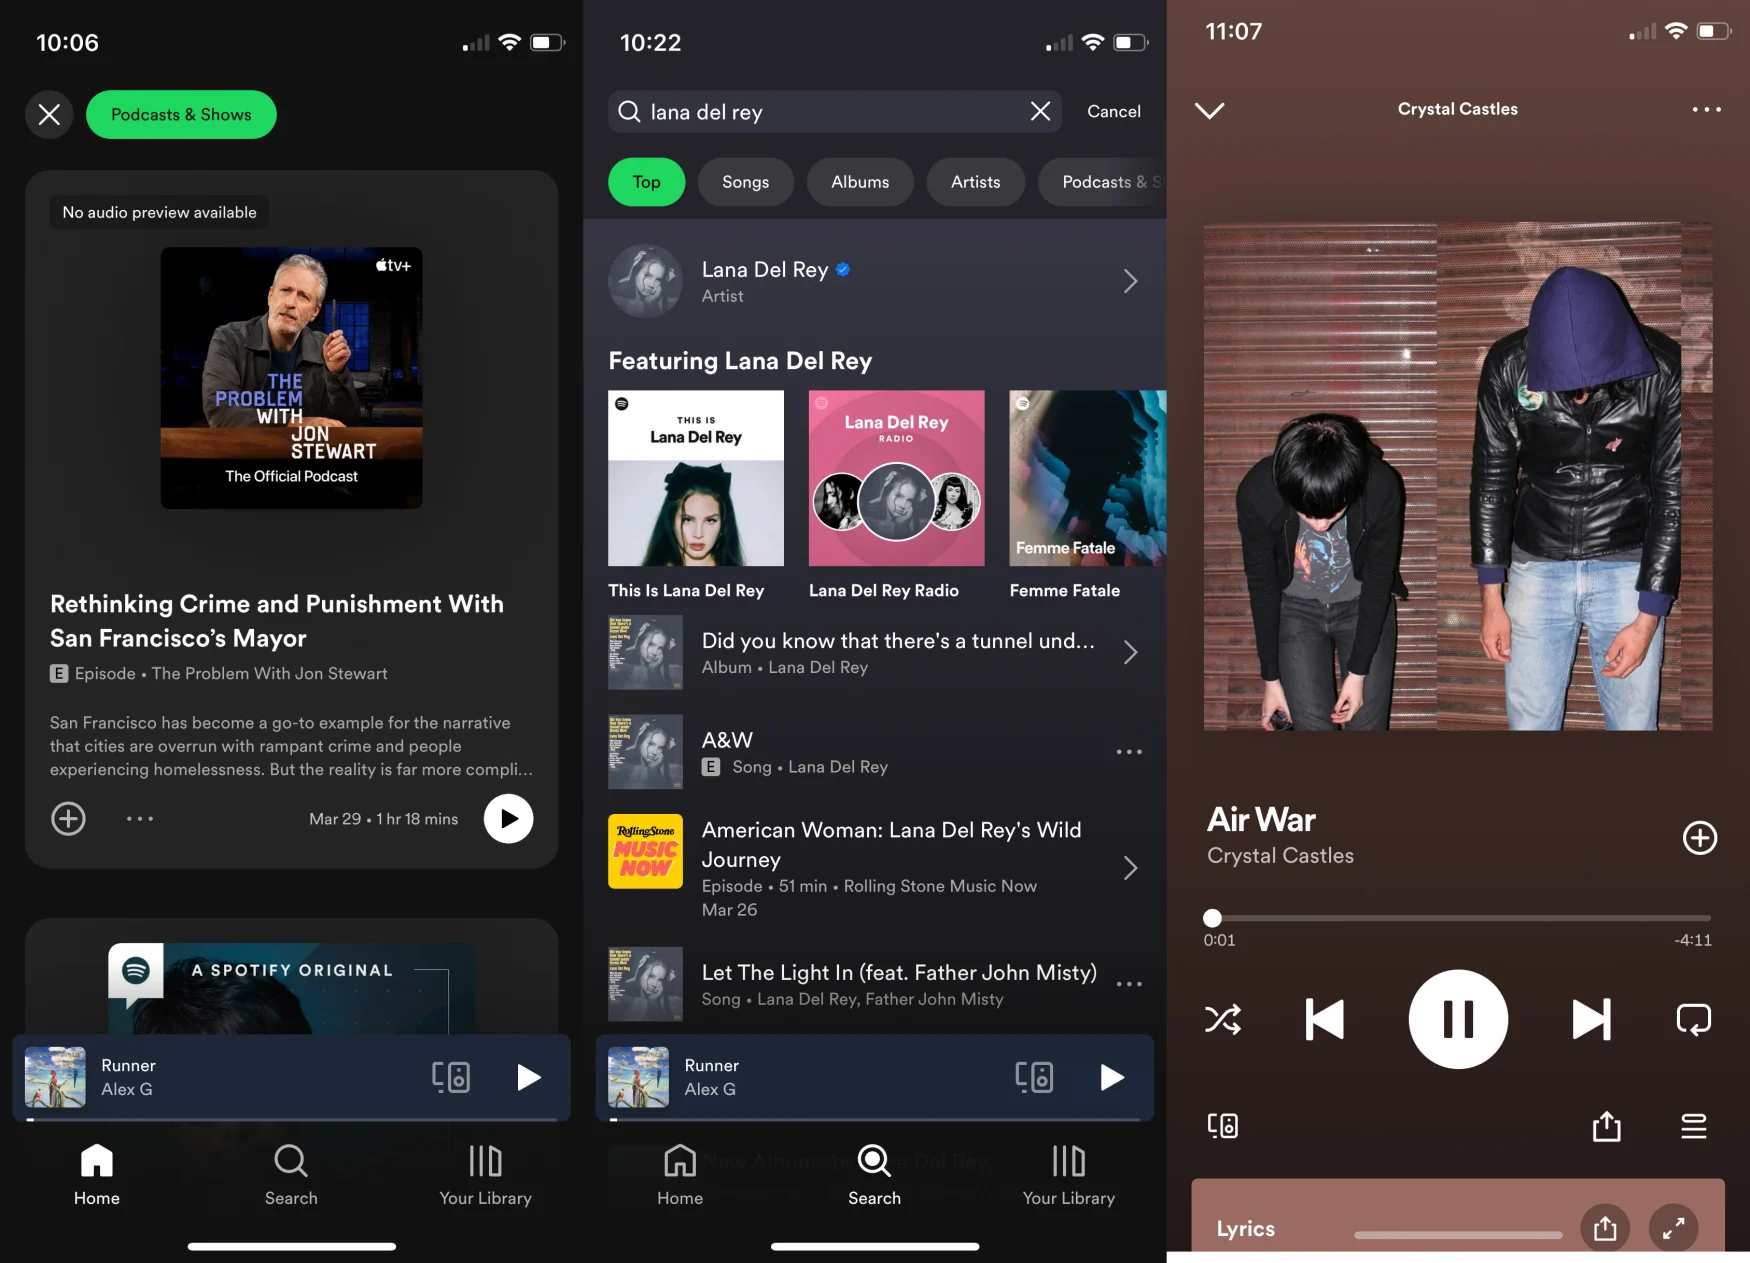 A collage of screenshots depicting the Spotify mobile app on iOS.